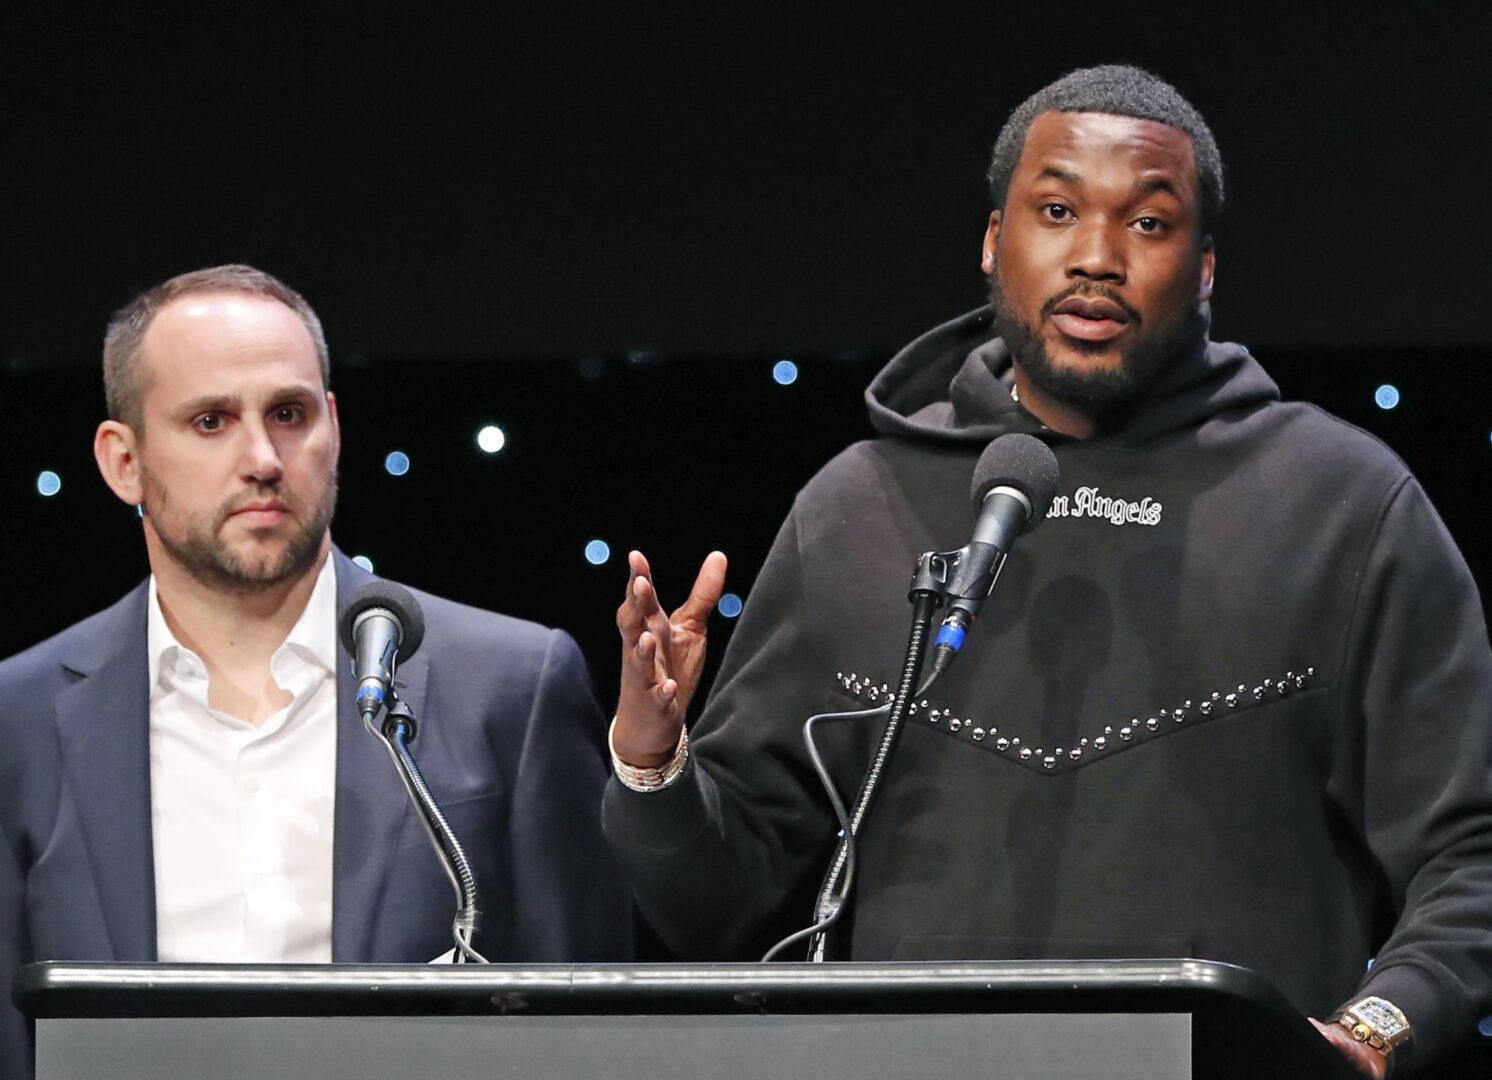 Meek Mill has apologised, let's move on - Jubilee House's Diaspora Office